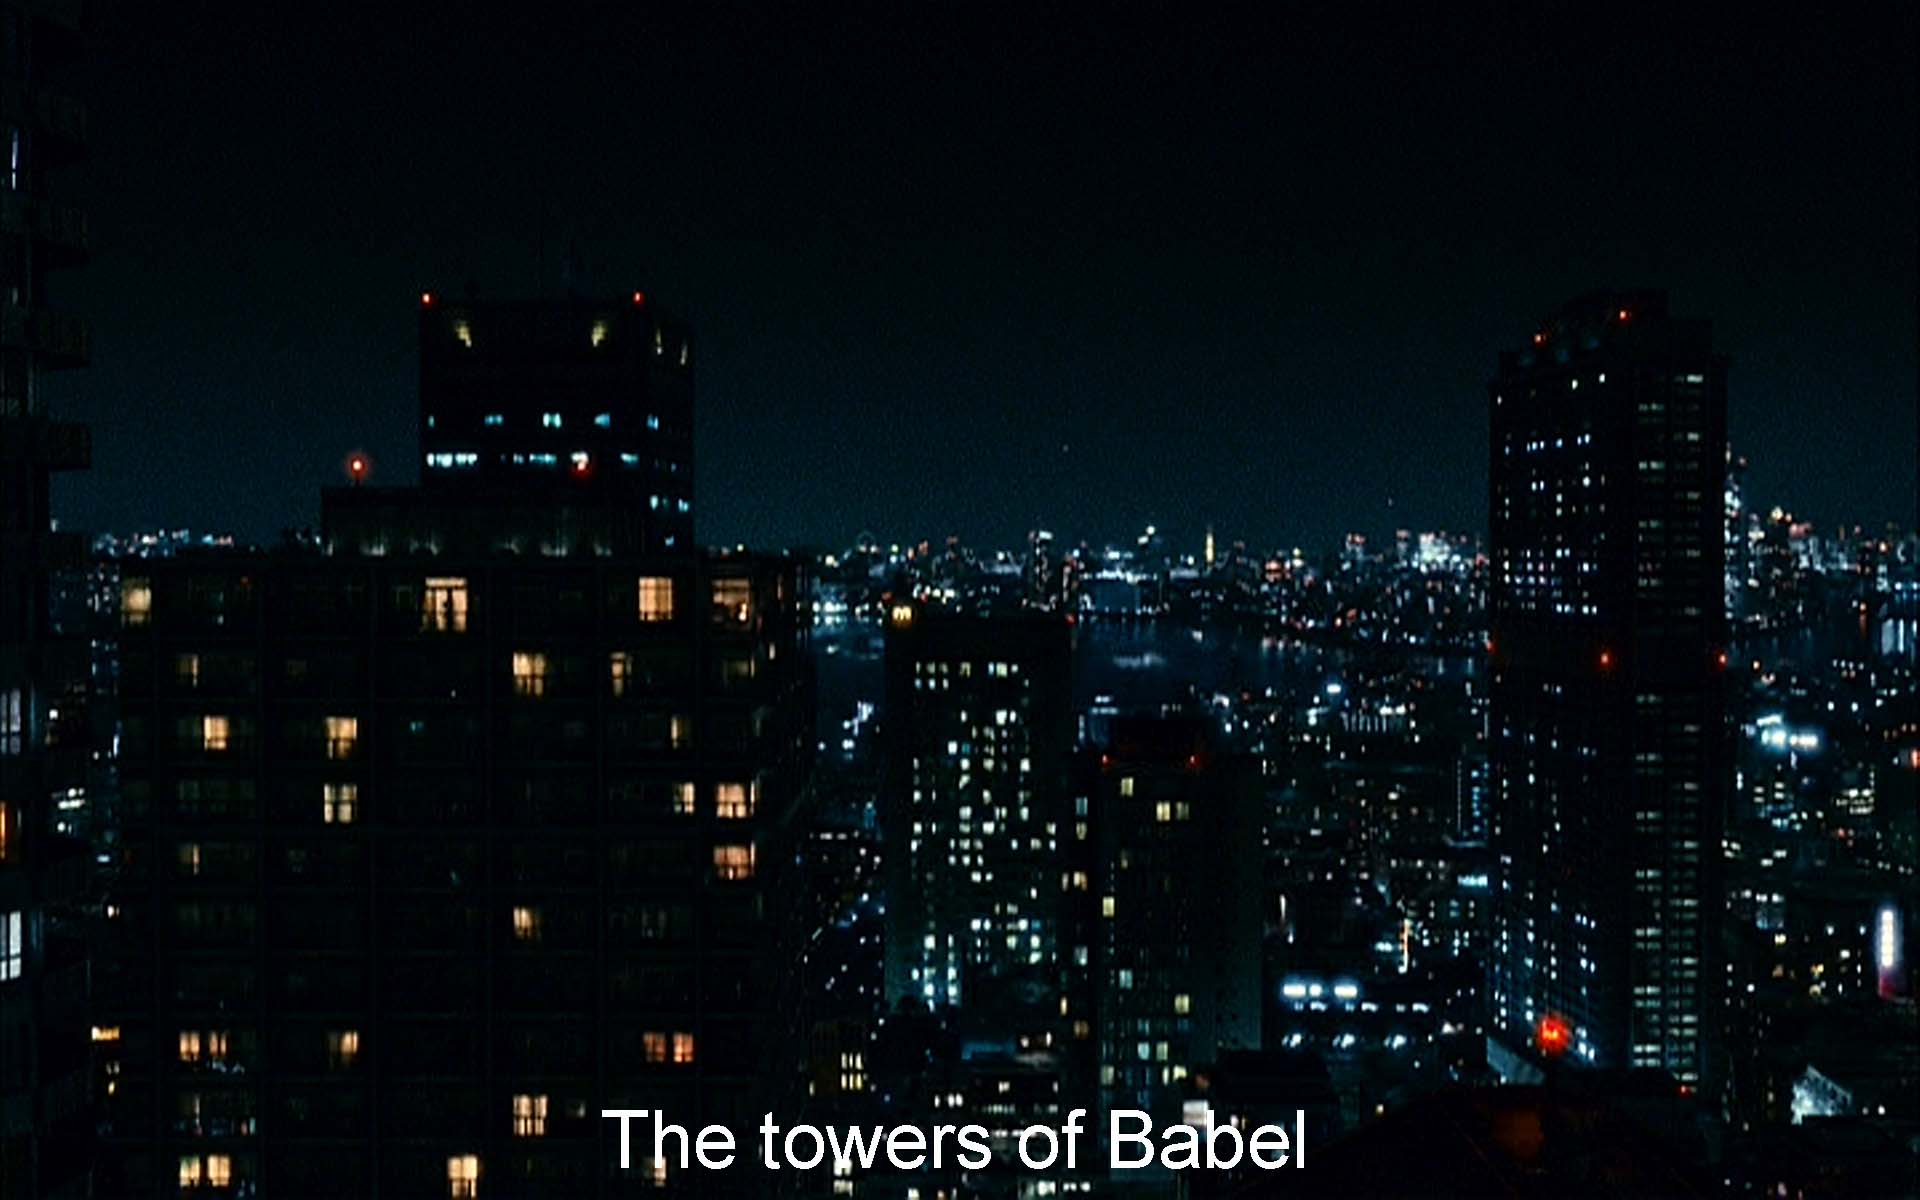 The towers of Babel